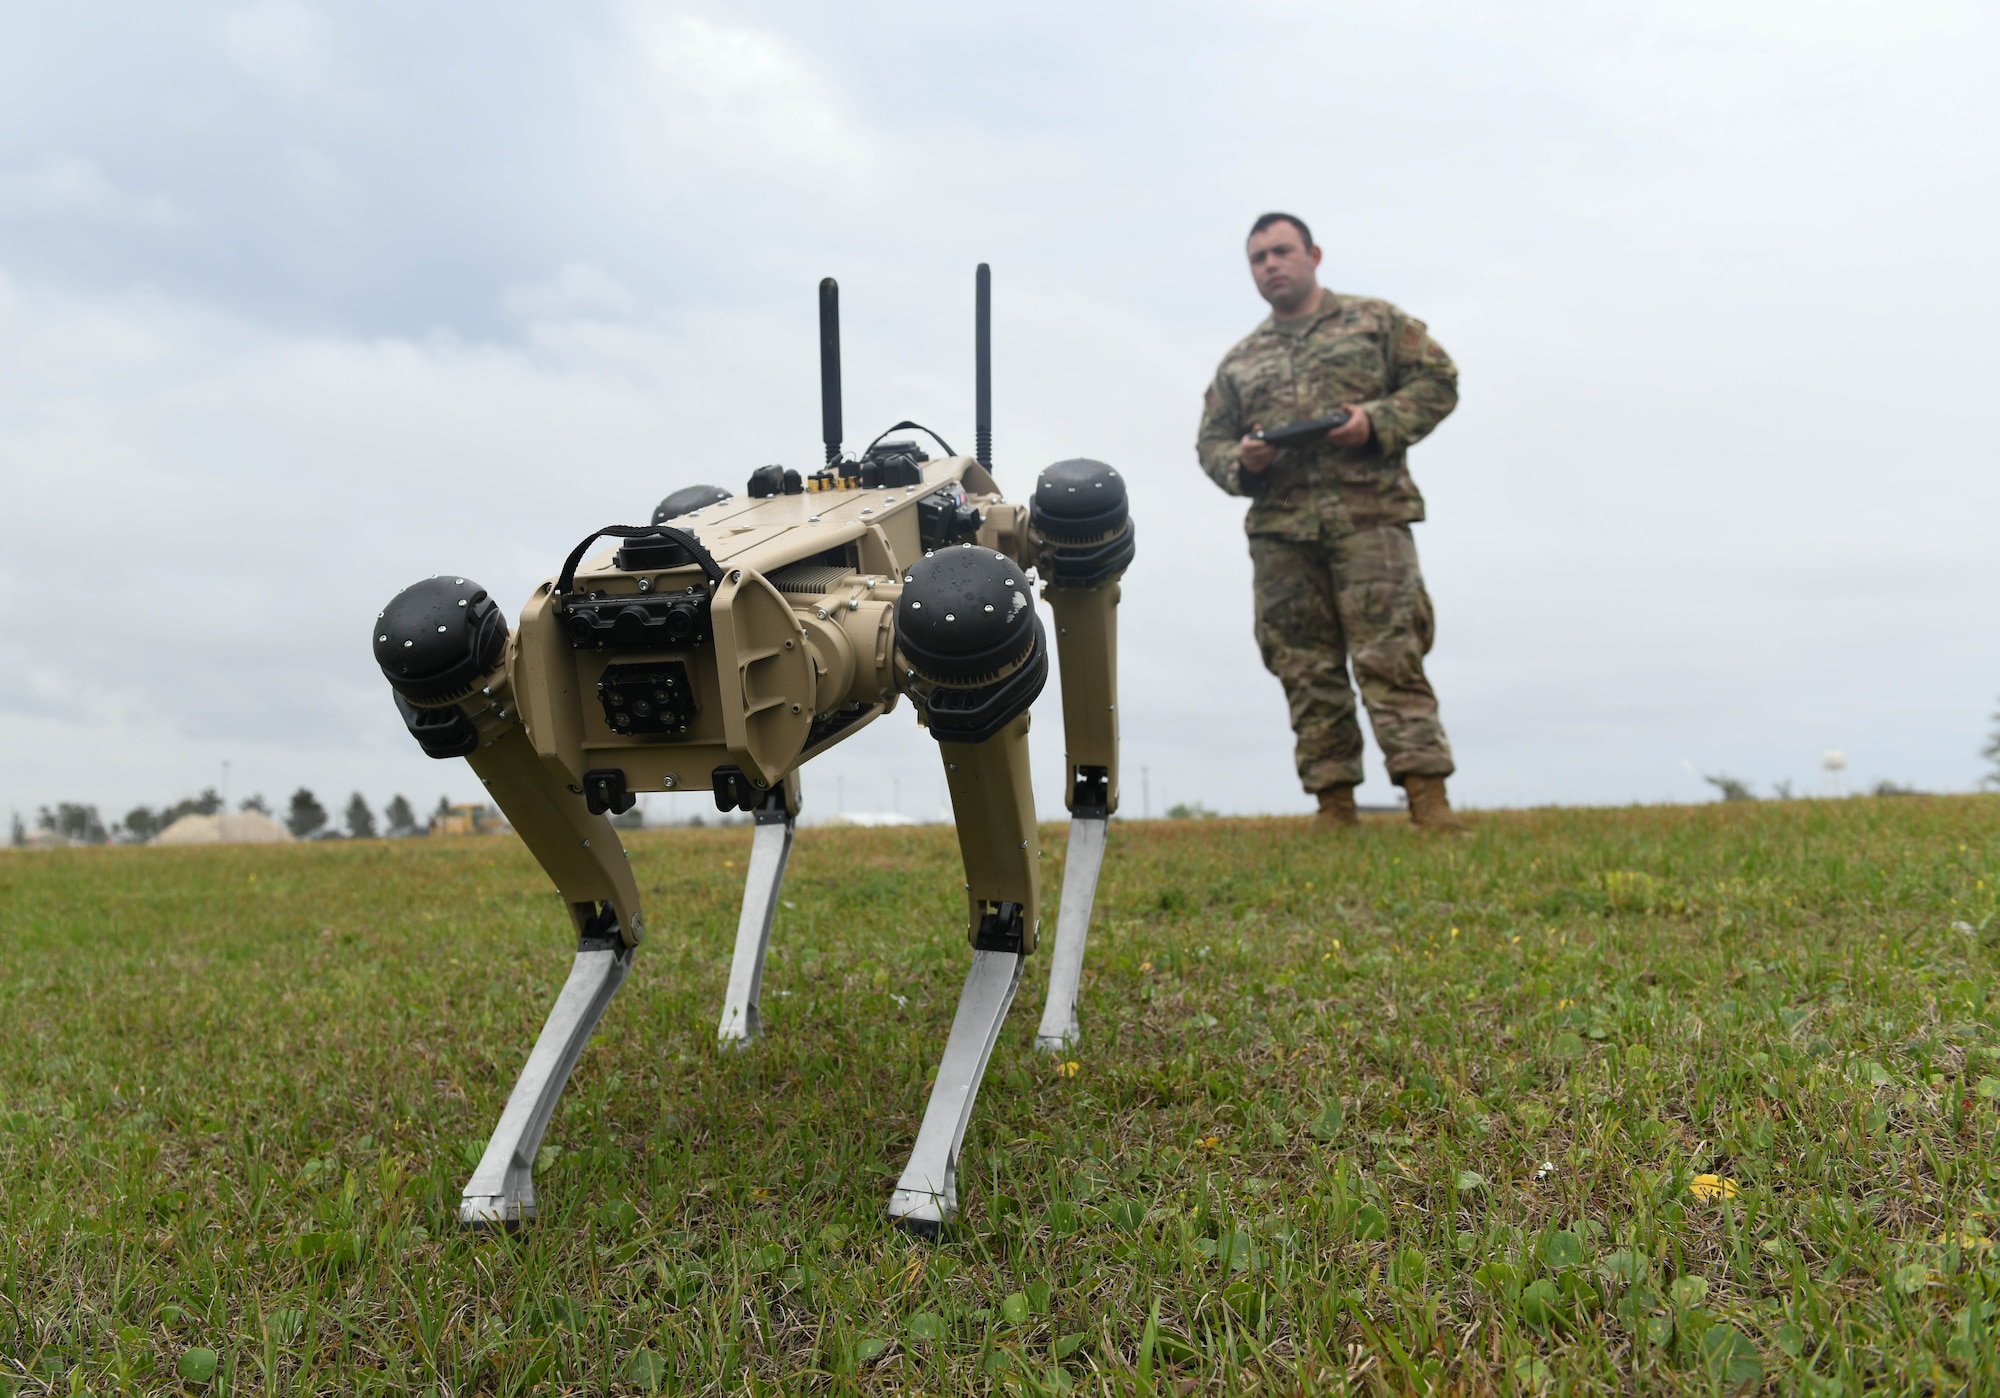 Robot arrive at Tyndall AFB > Force > Display